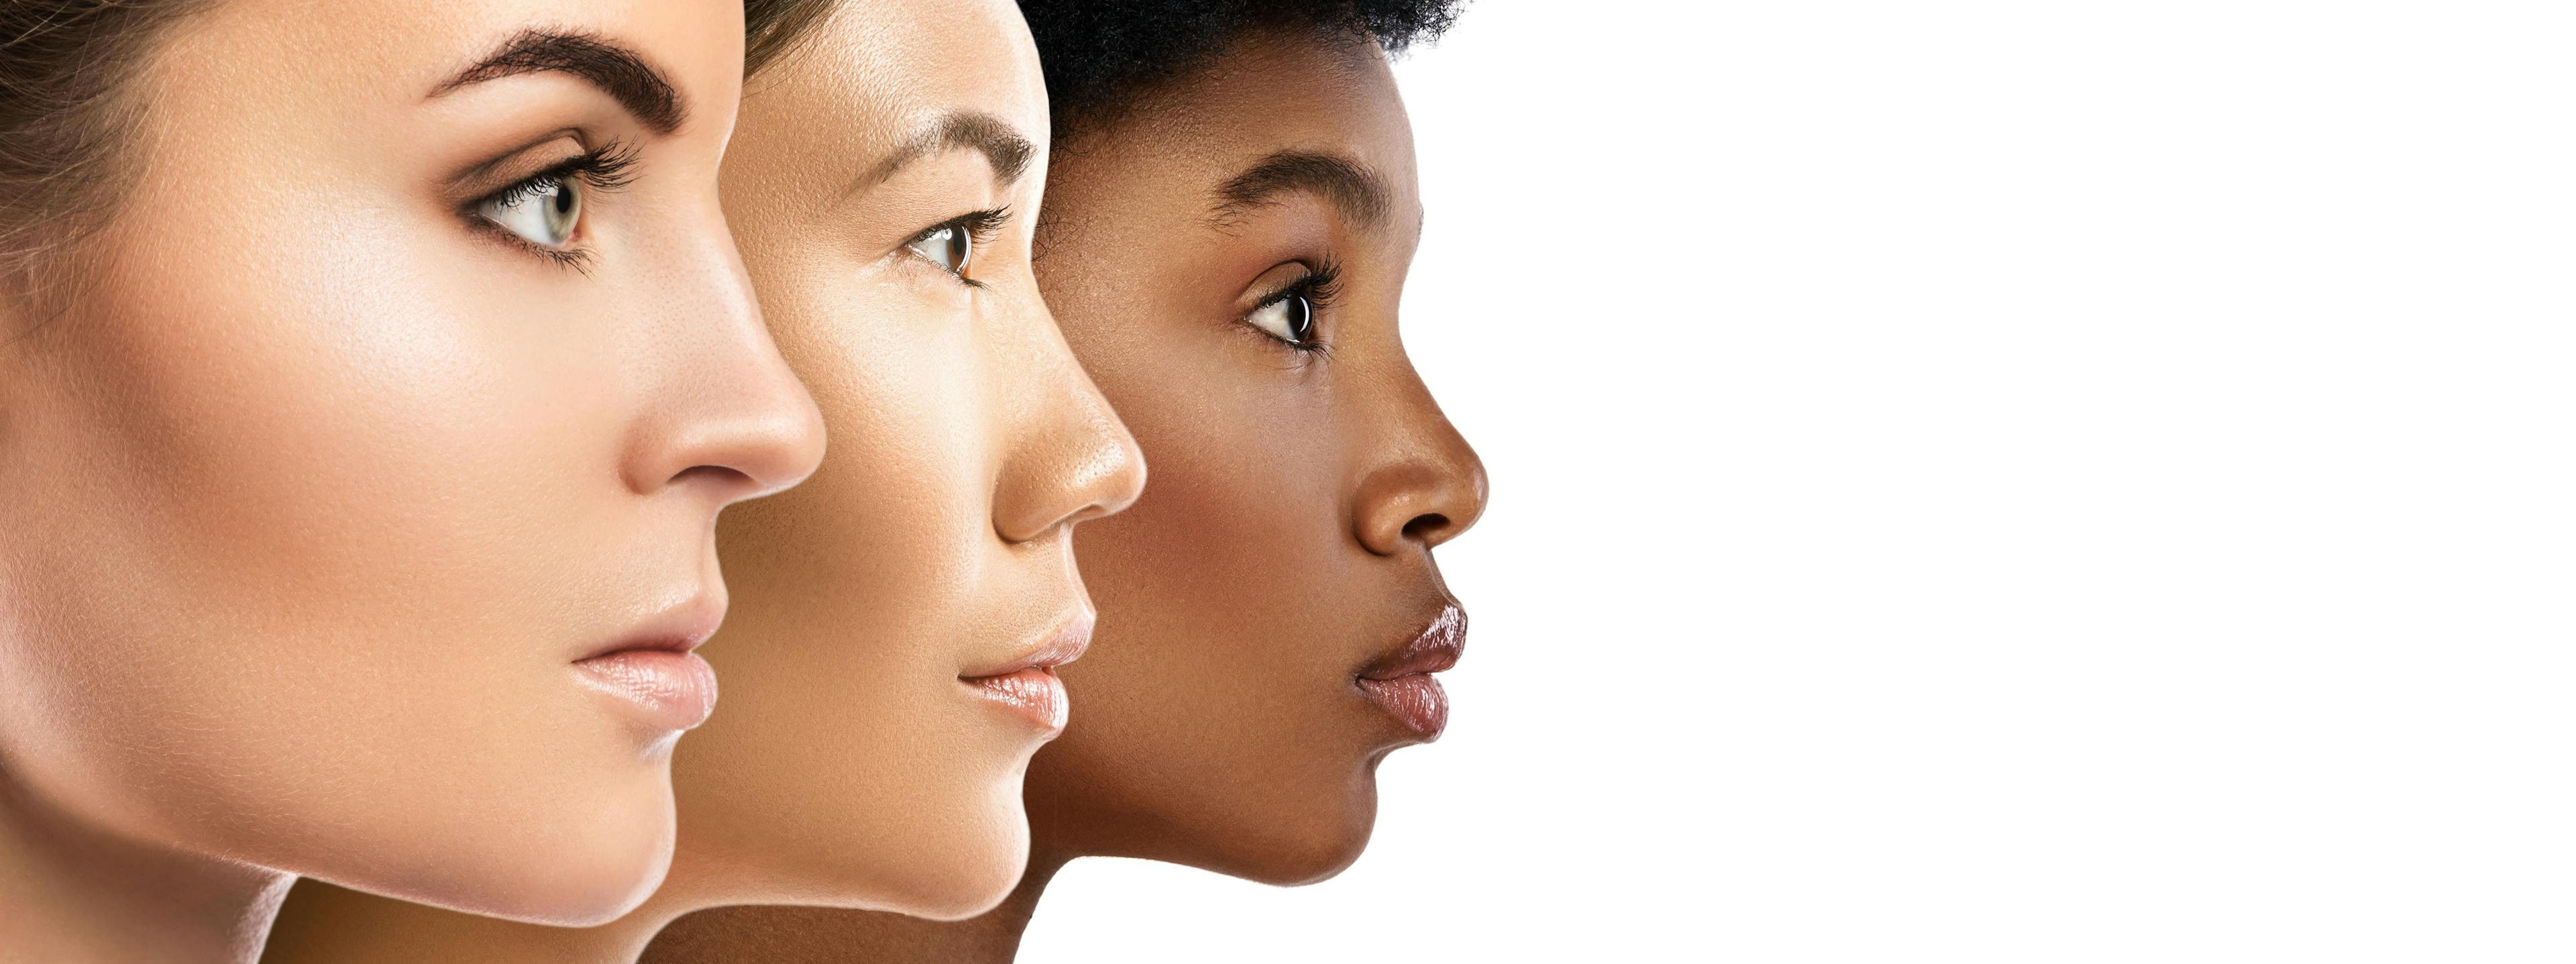 Racial Differences for Preferred Acne Care 